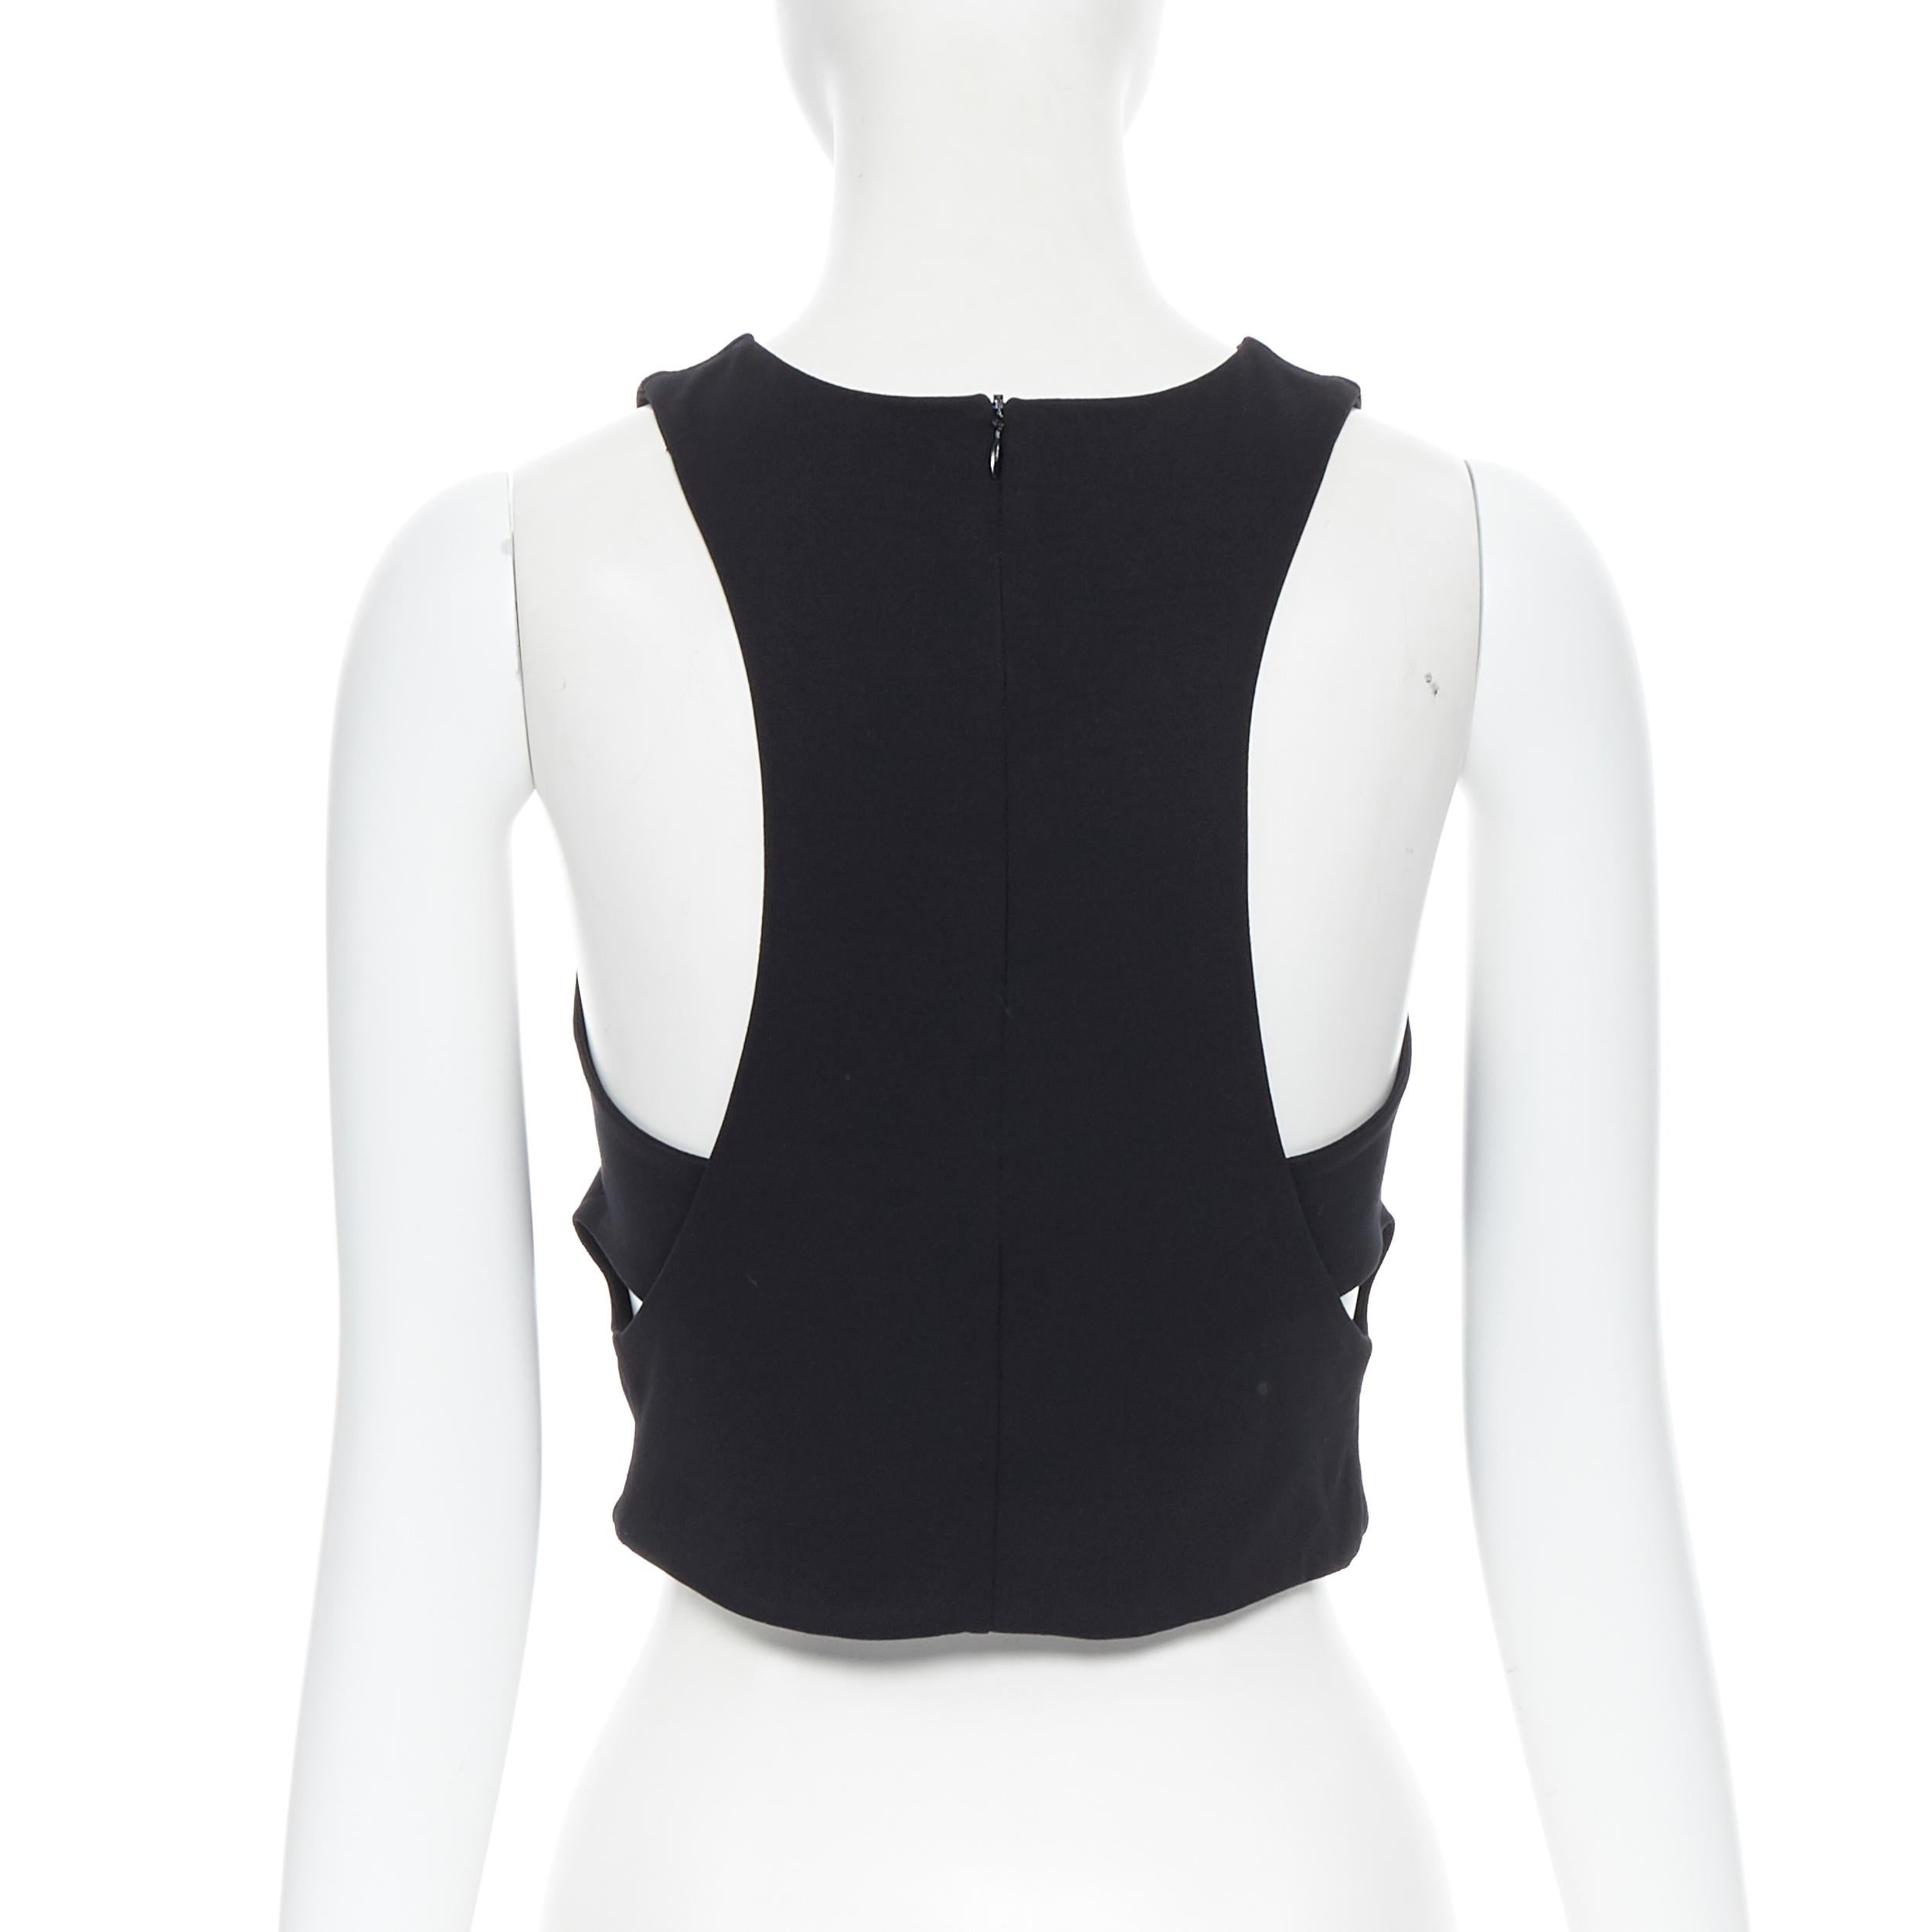 Black T BY ALEXANDER WANG black cut out crossover bandage back sports crop top M